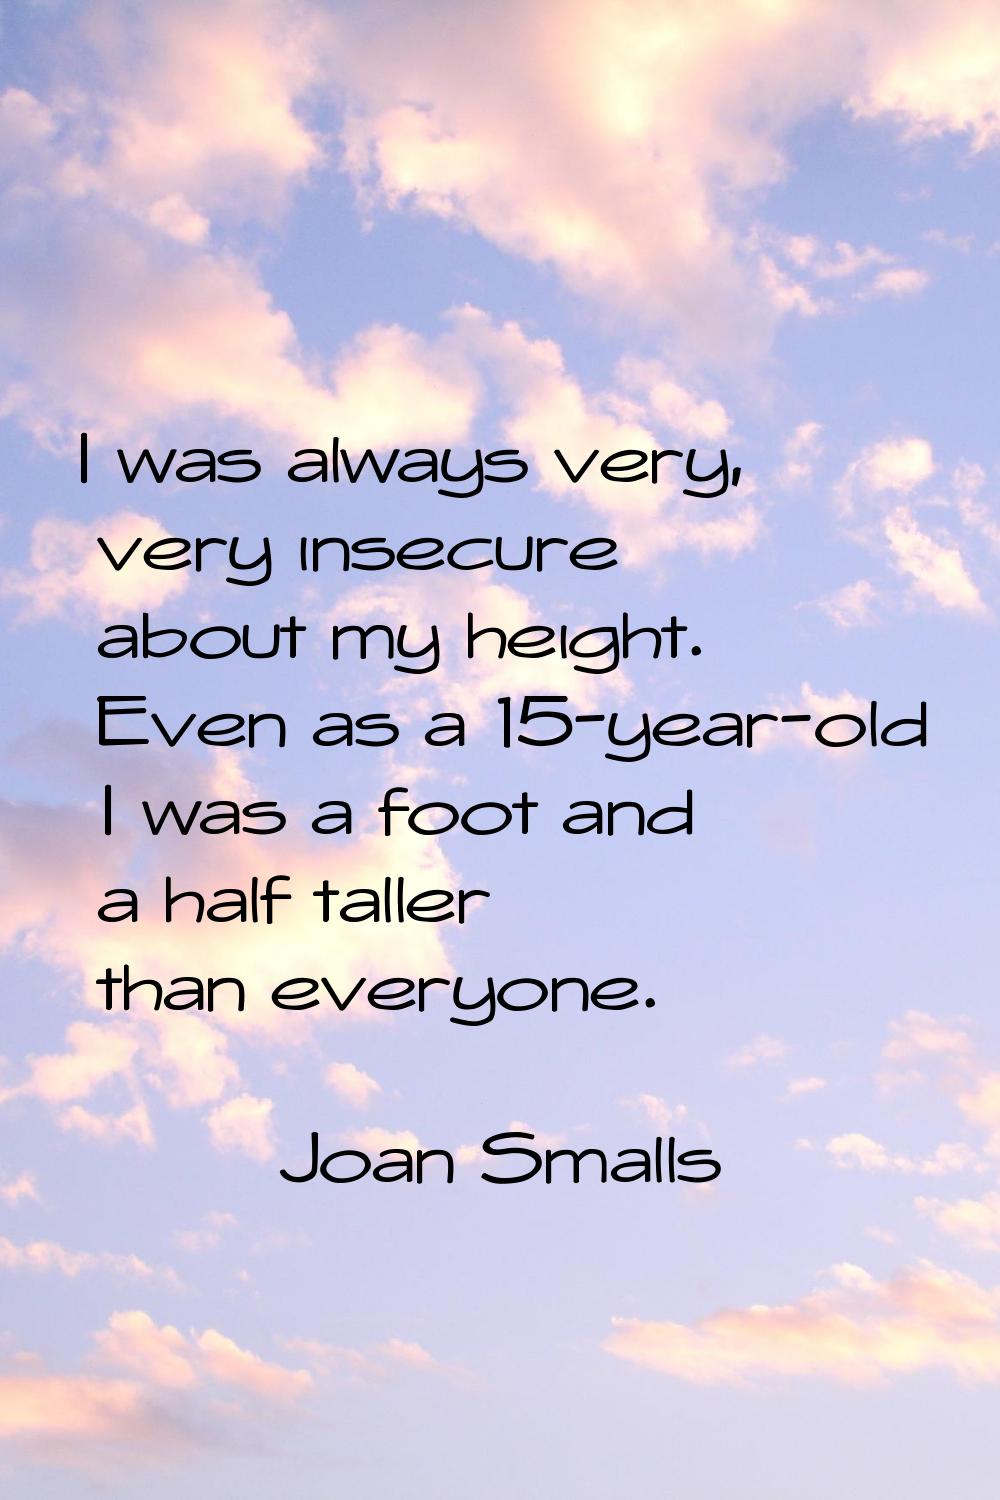 I was always very, very insecure about my height. Even as a 15-year-old I was a foot and a half tal